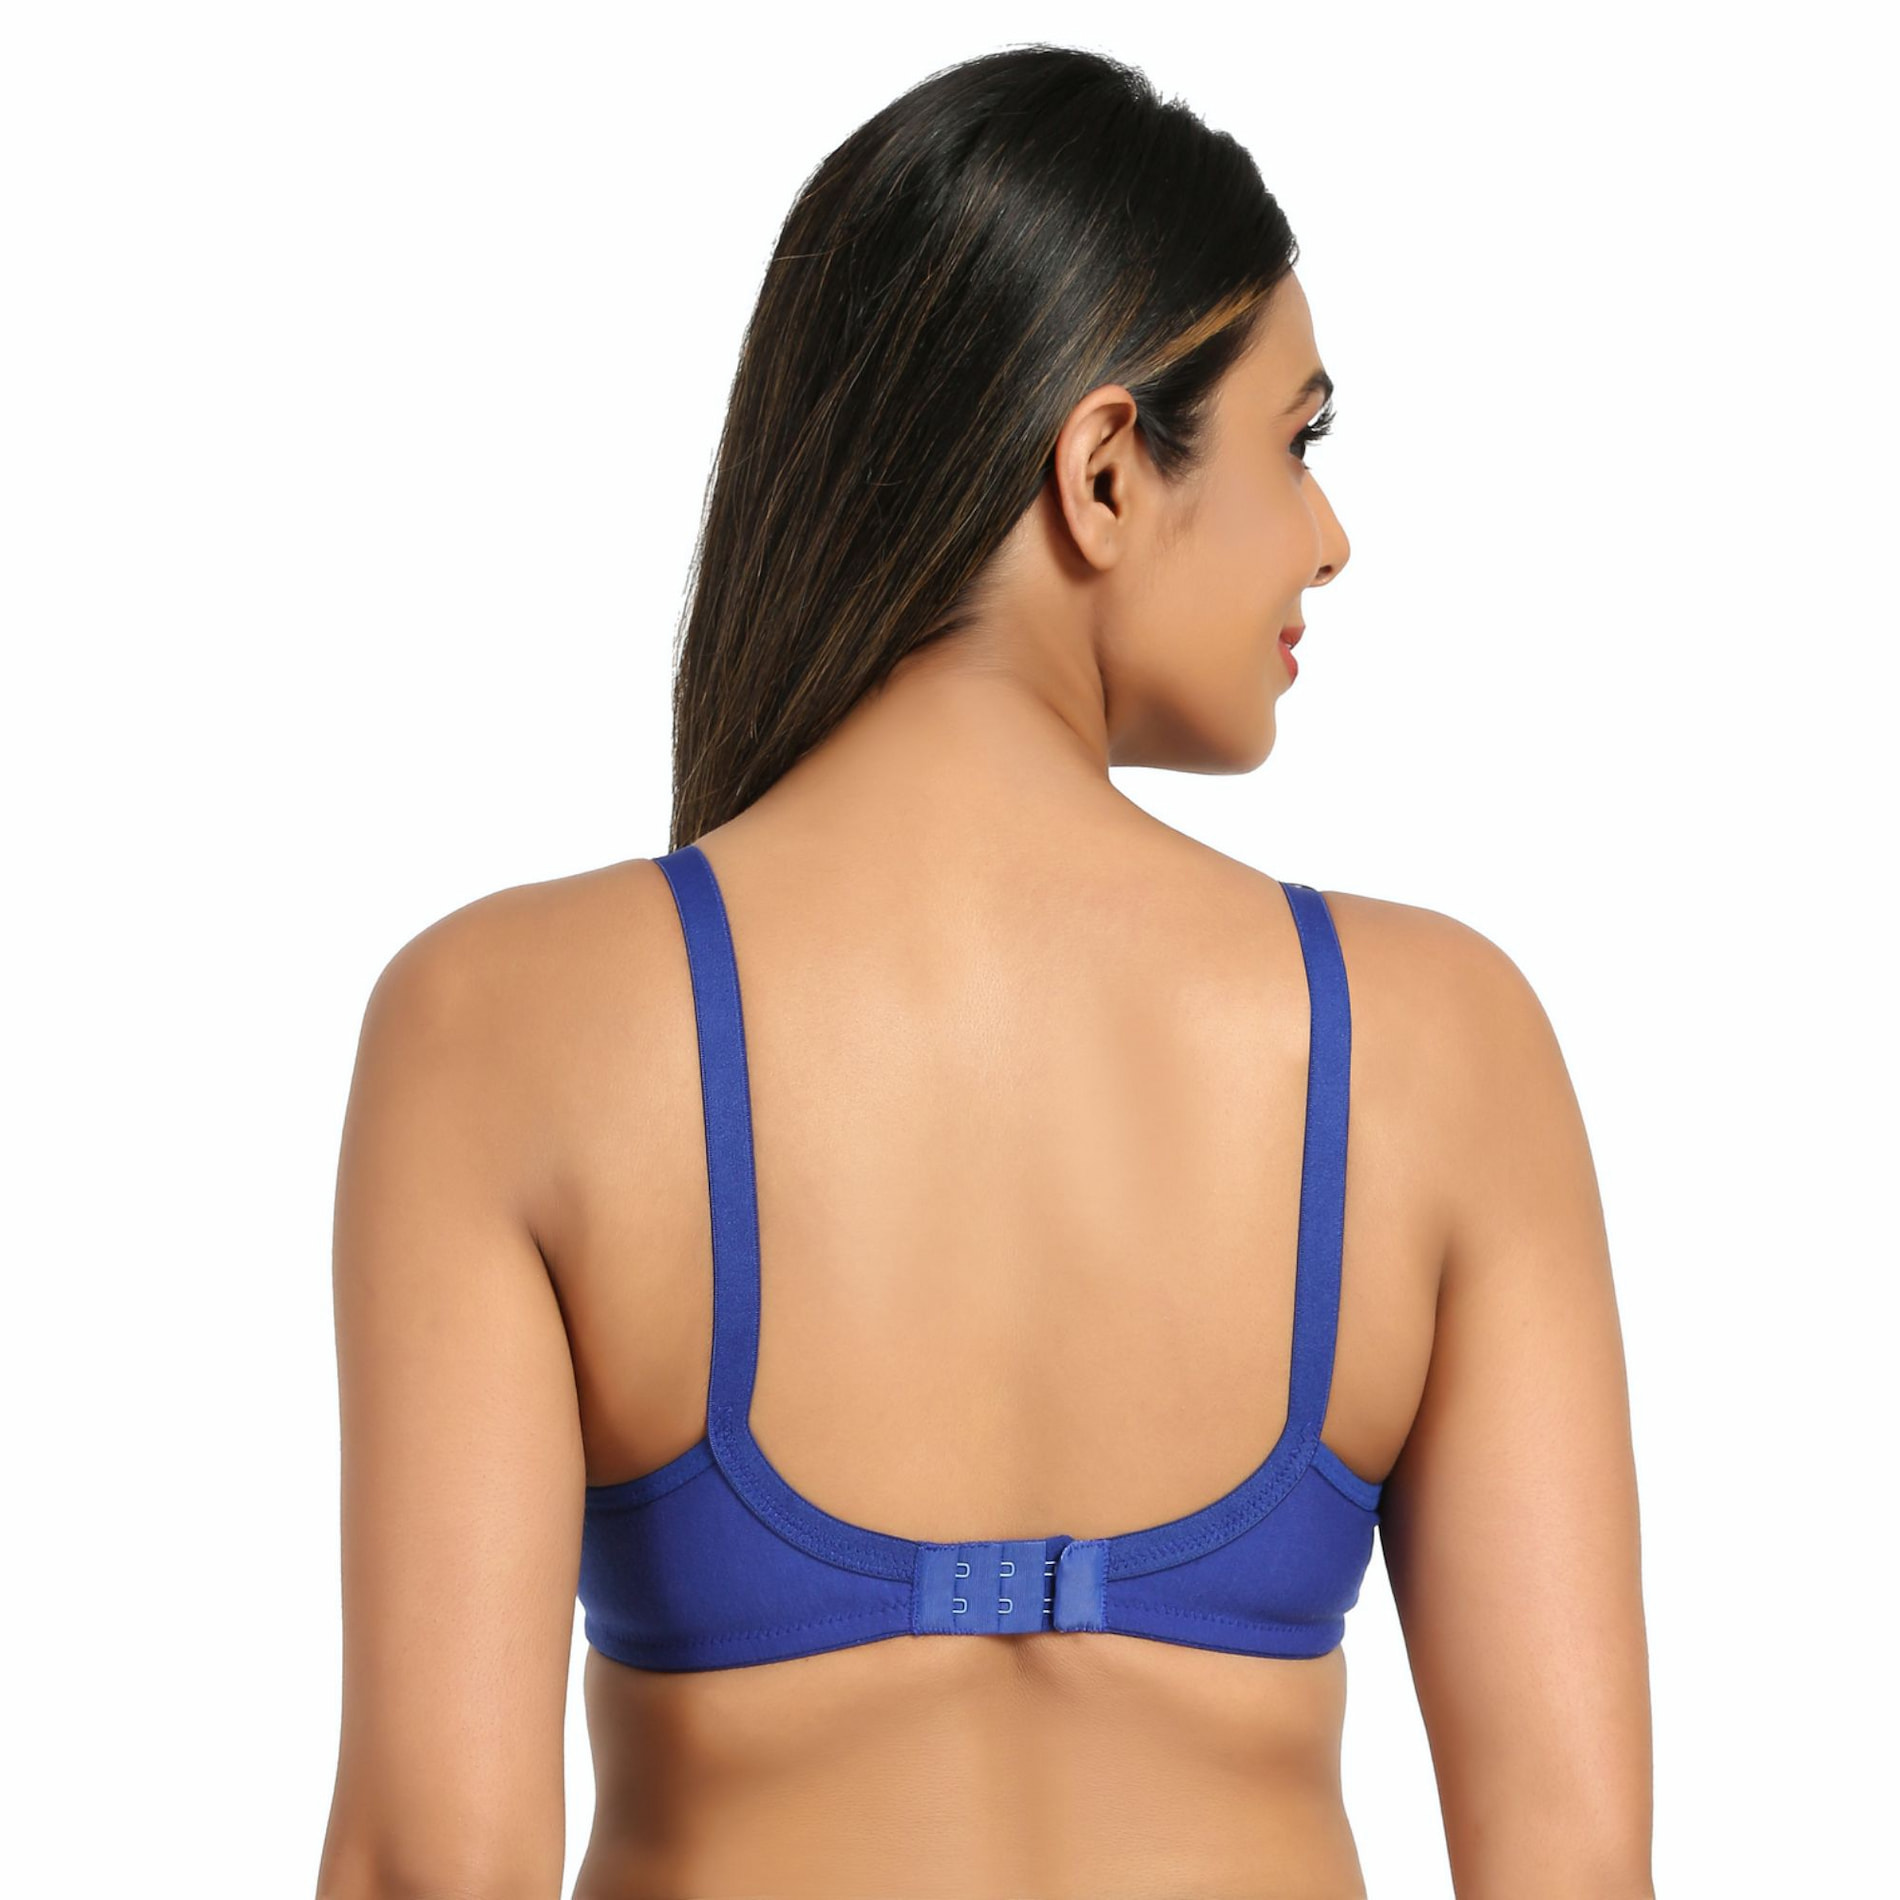 Maternity/Nursing Bras Non-Wired, Non-Padded with free Bra Extender - Persian Blue 38 B 